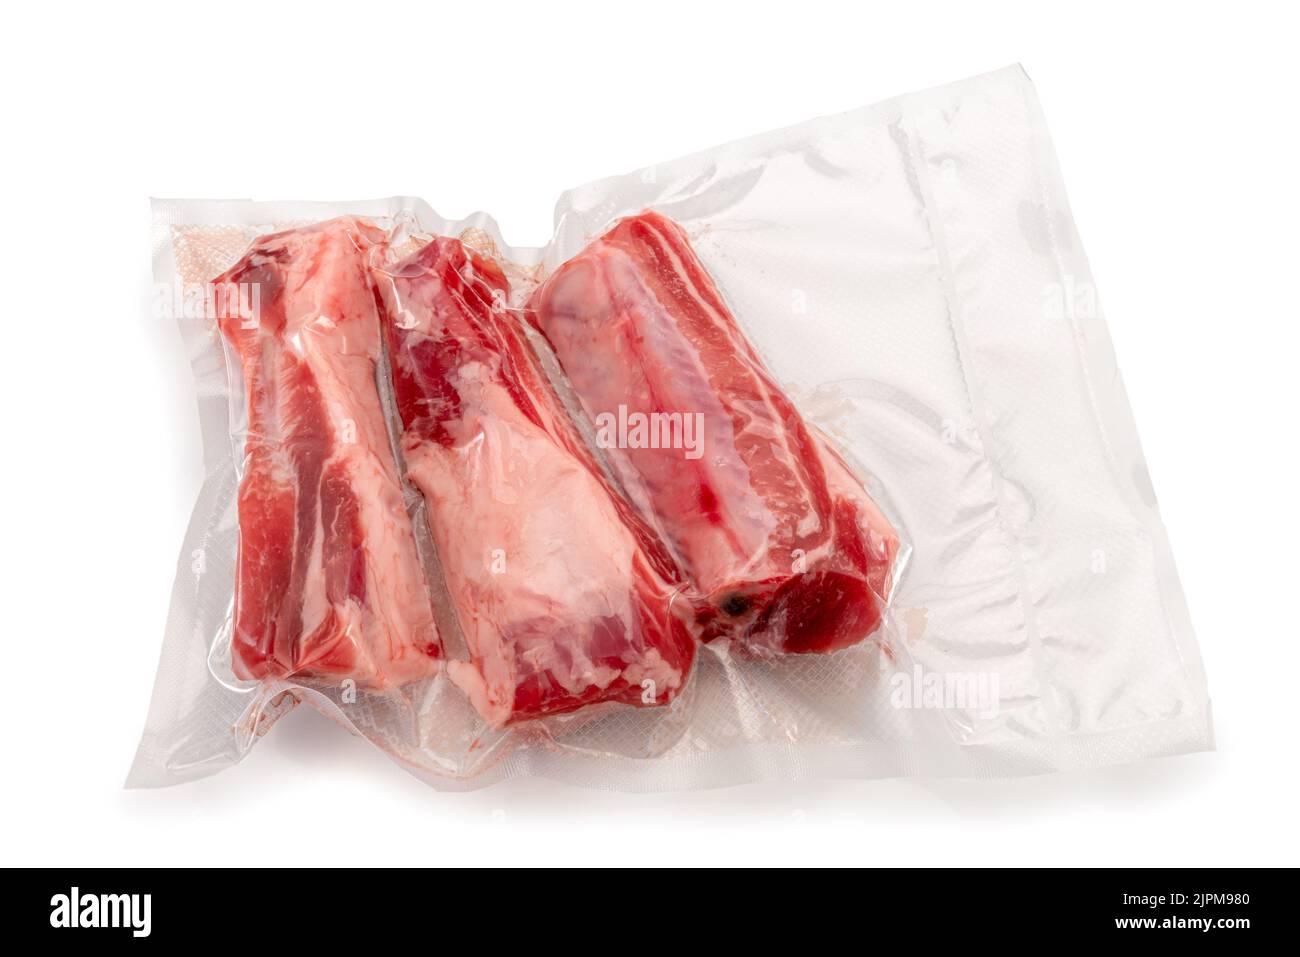 Pork ribs in vacuum packed sealed for sous vide cooking on white background in top view Stock Photo